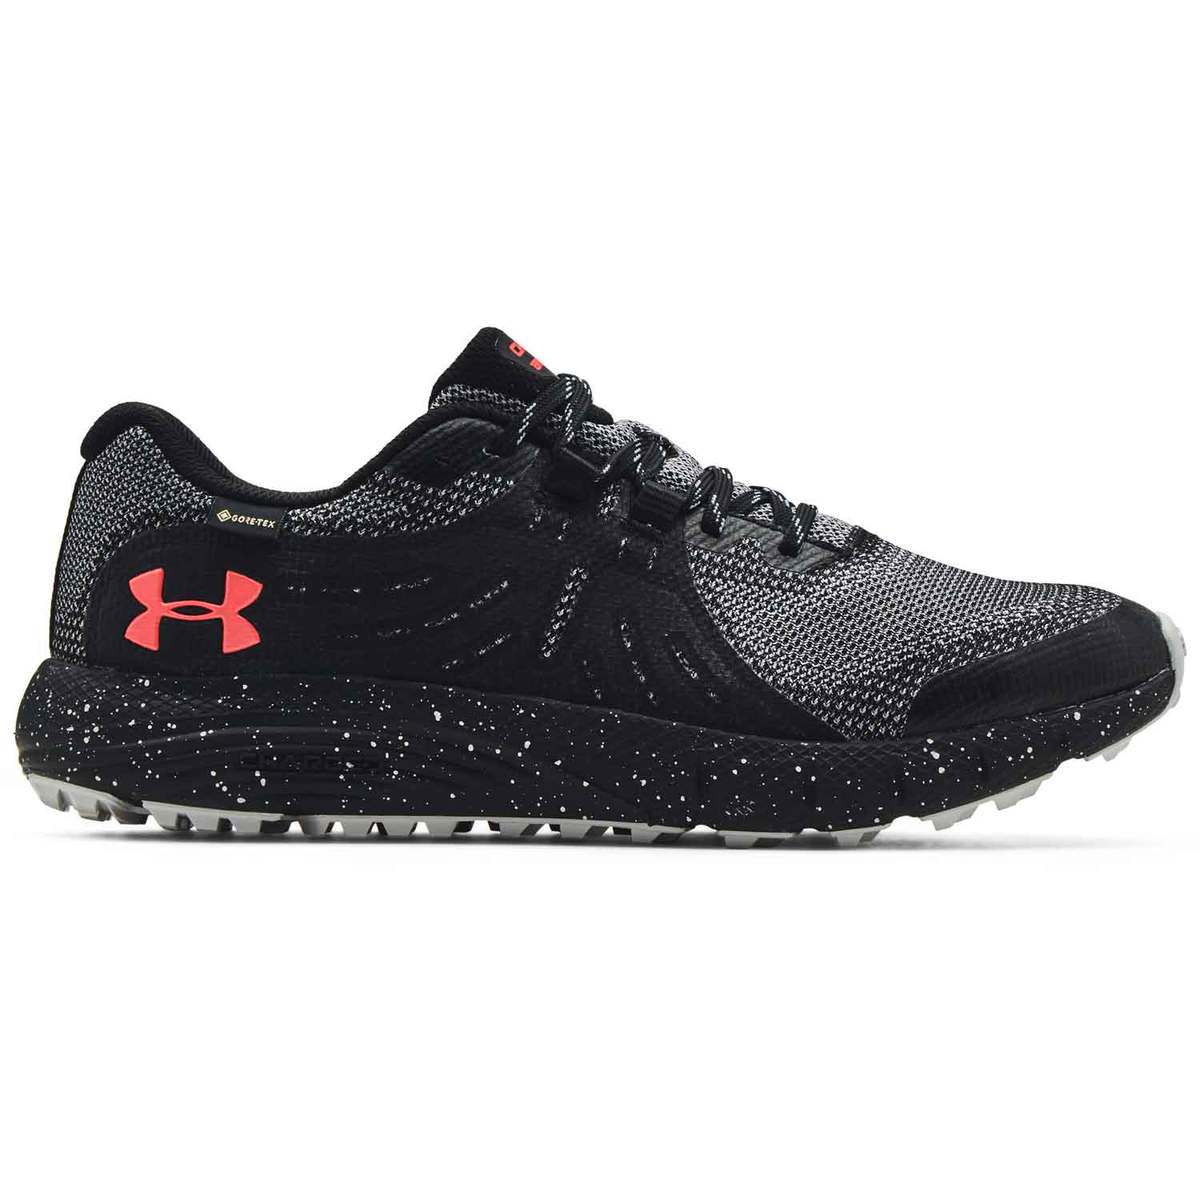 Under Armour Men's Charged Bandit Trail Waterproof Trail Running Shoes ...